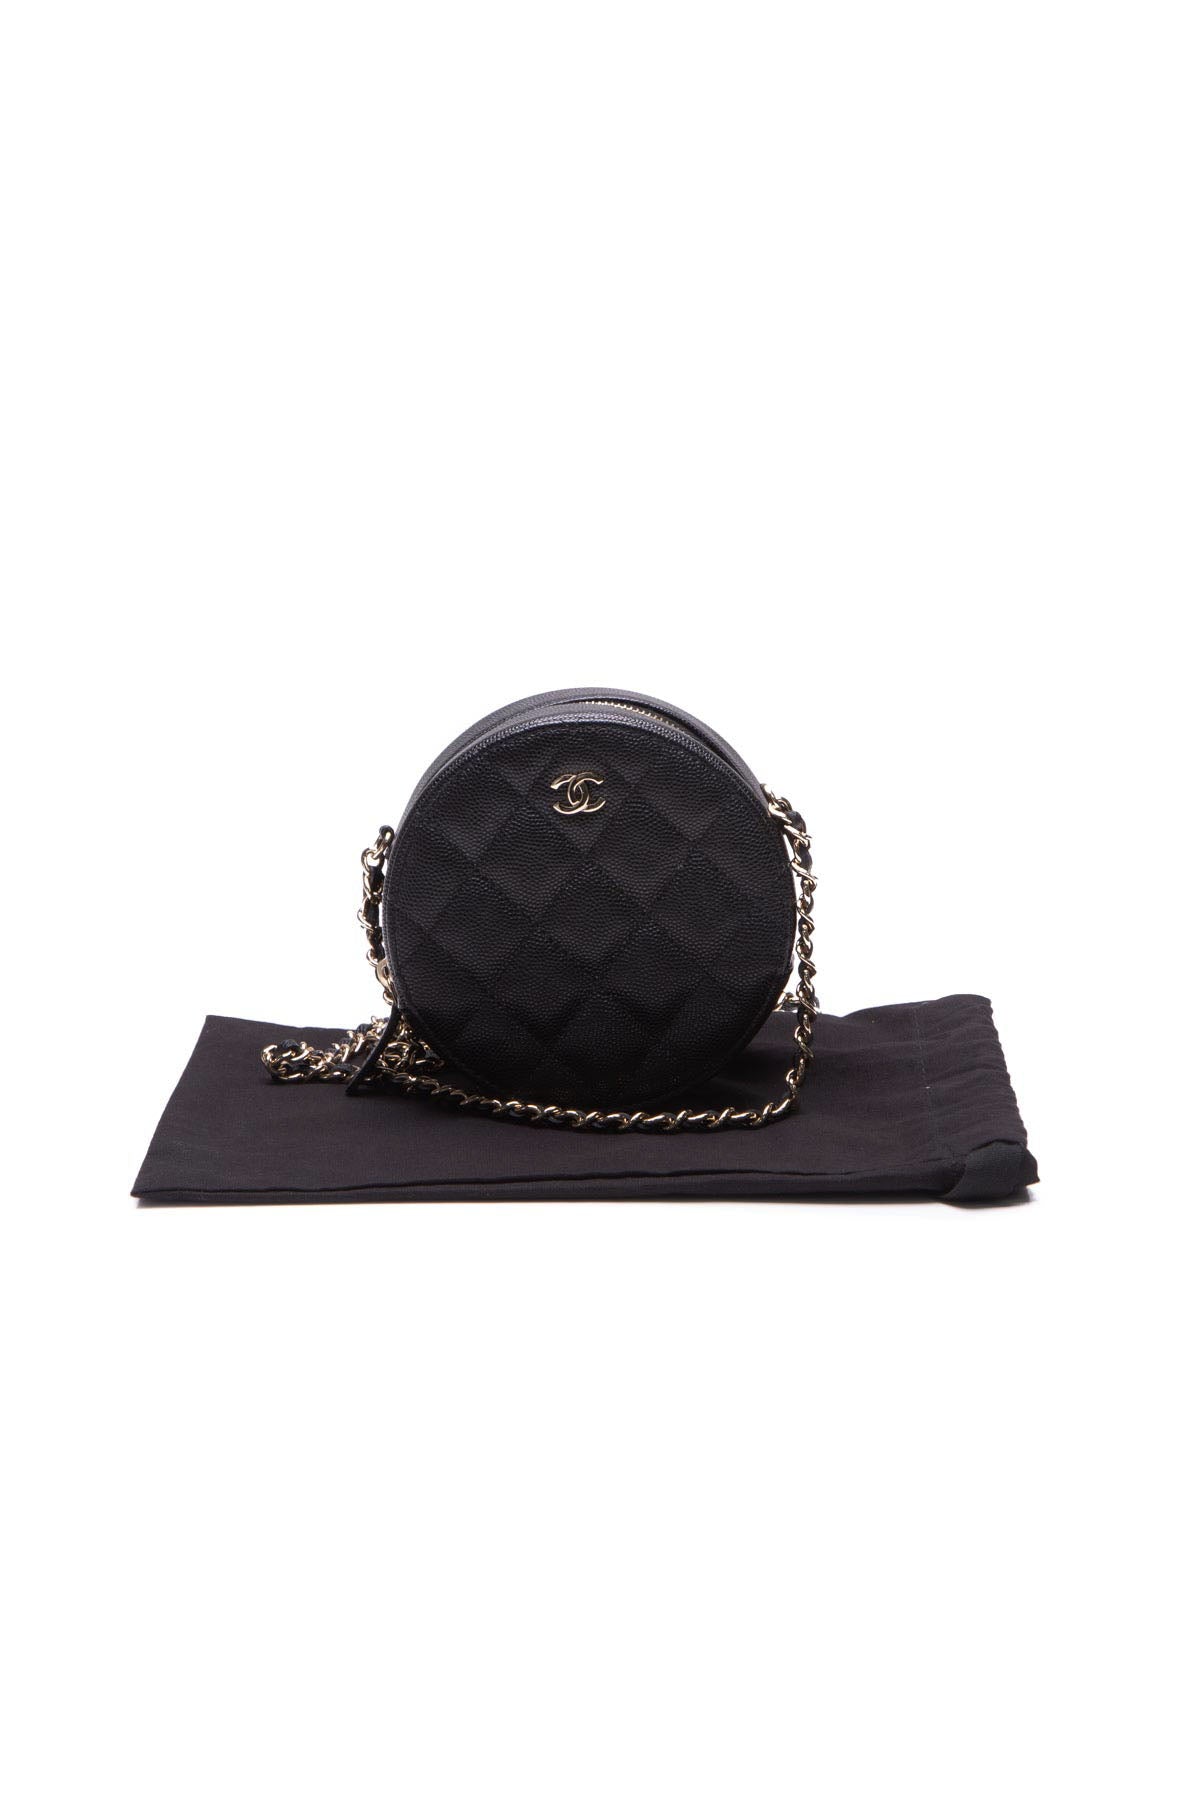 CHANEL Pre-Owned 2019 Round Classic Flap Shoulder Bag - Farfetch